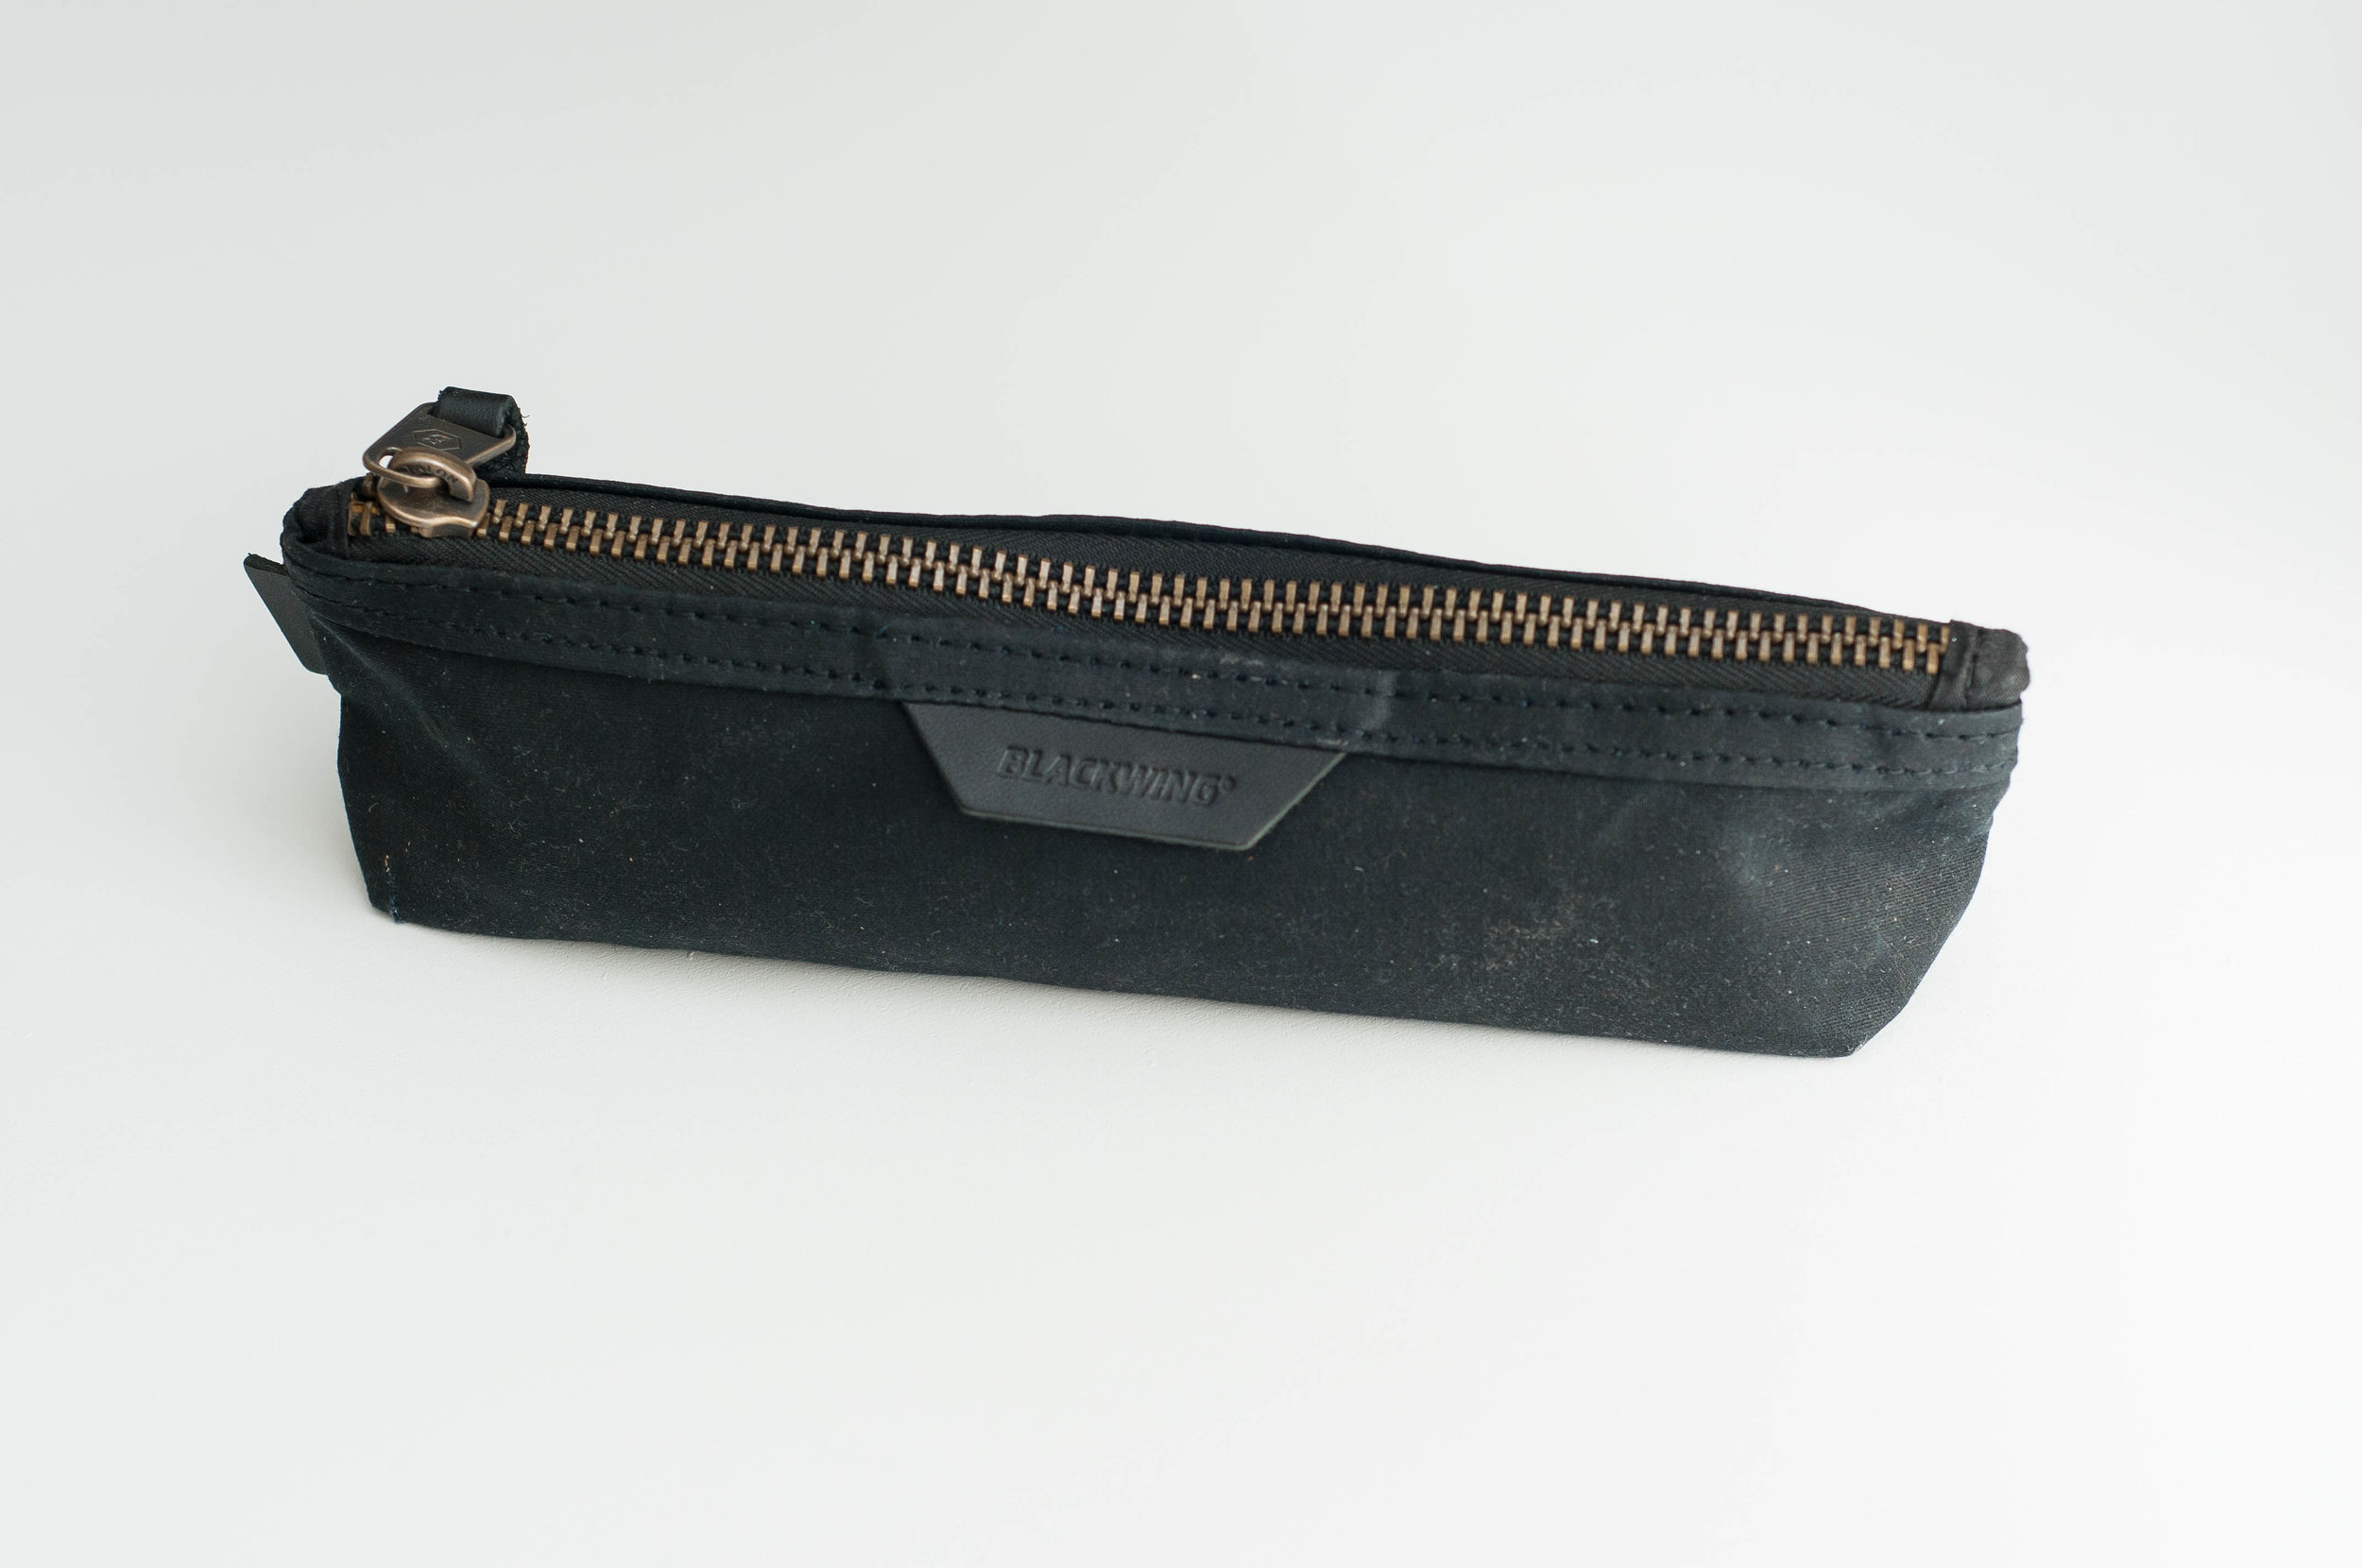 Palomino Blackwing Pencil Pouch Review — The Pen Addict